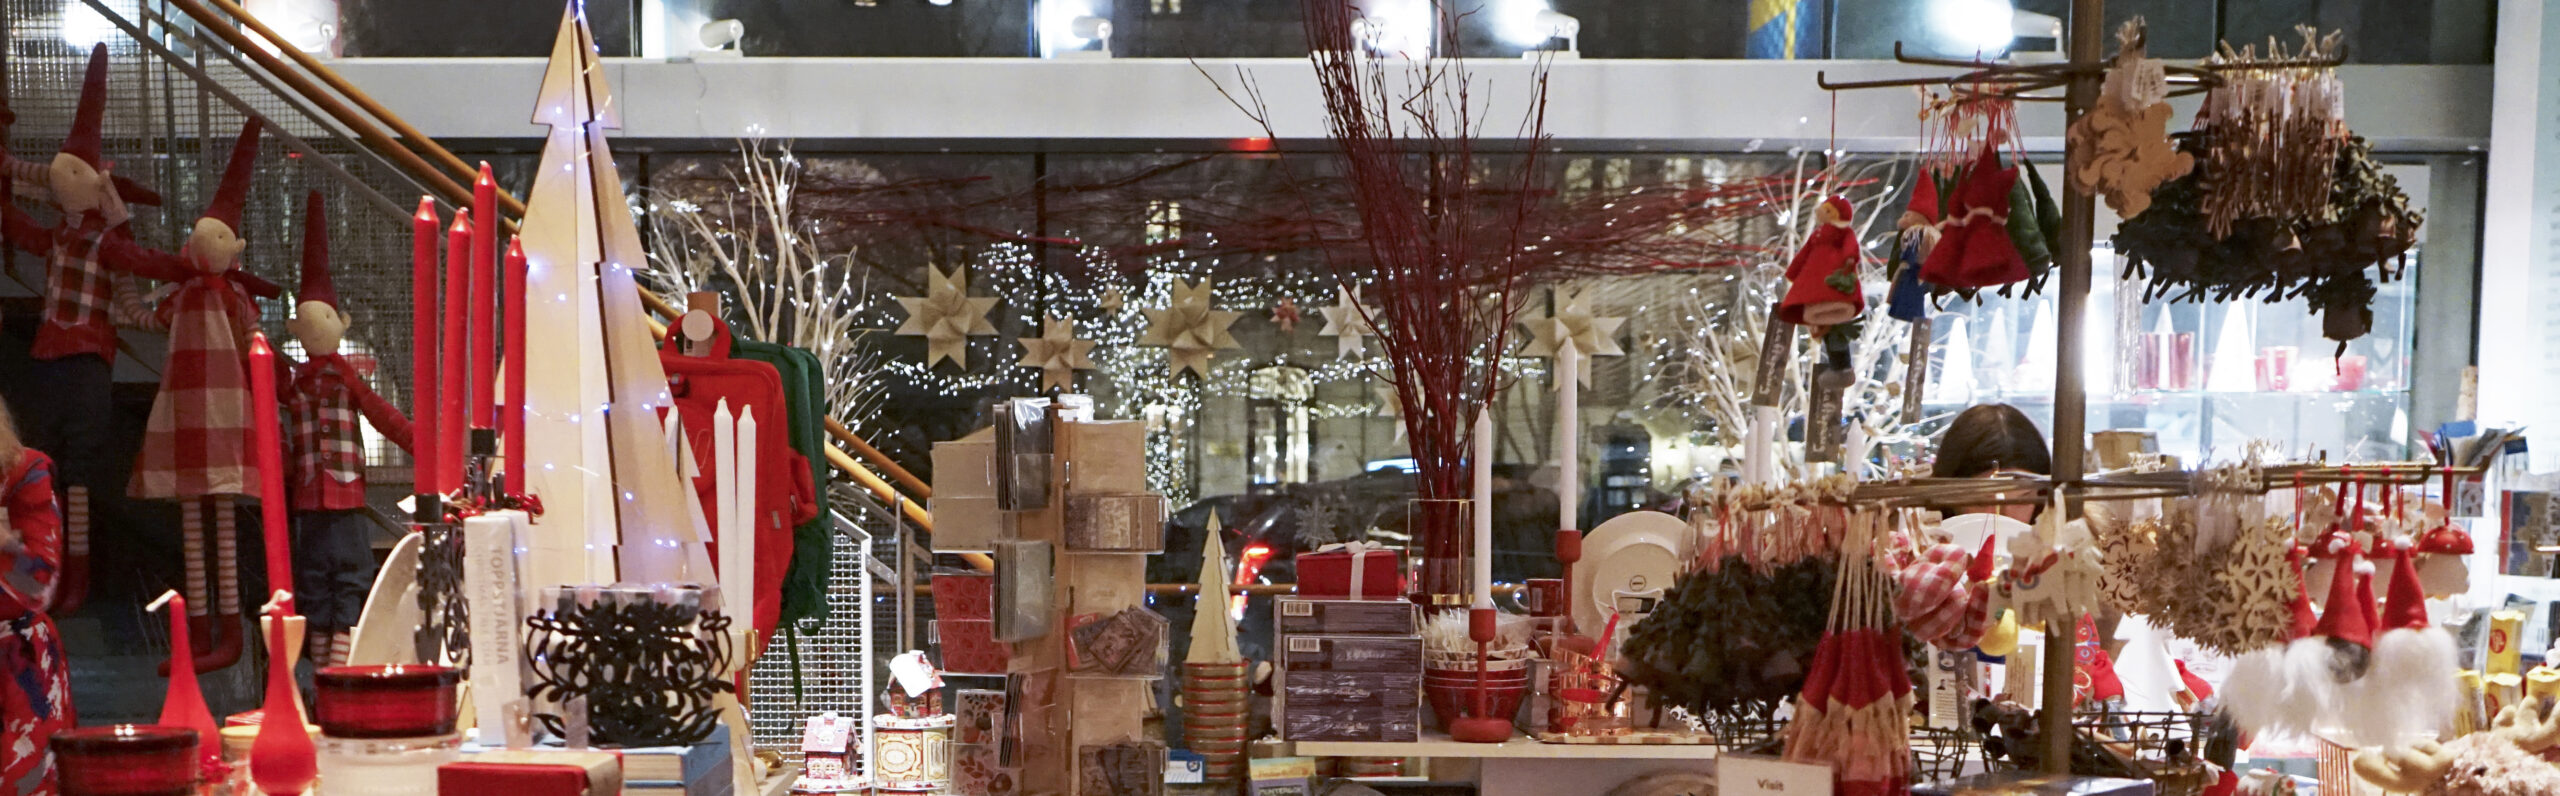 Photo from the shop displaying a variety of holiday themed items